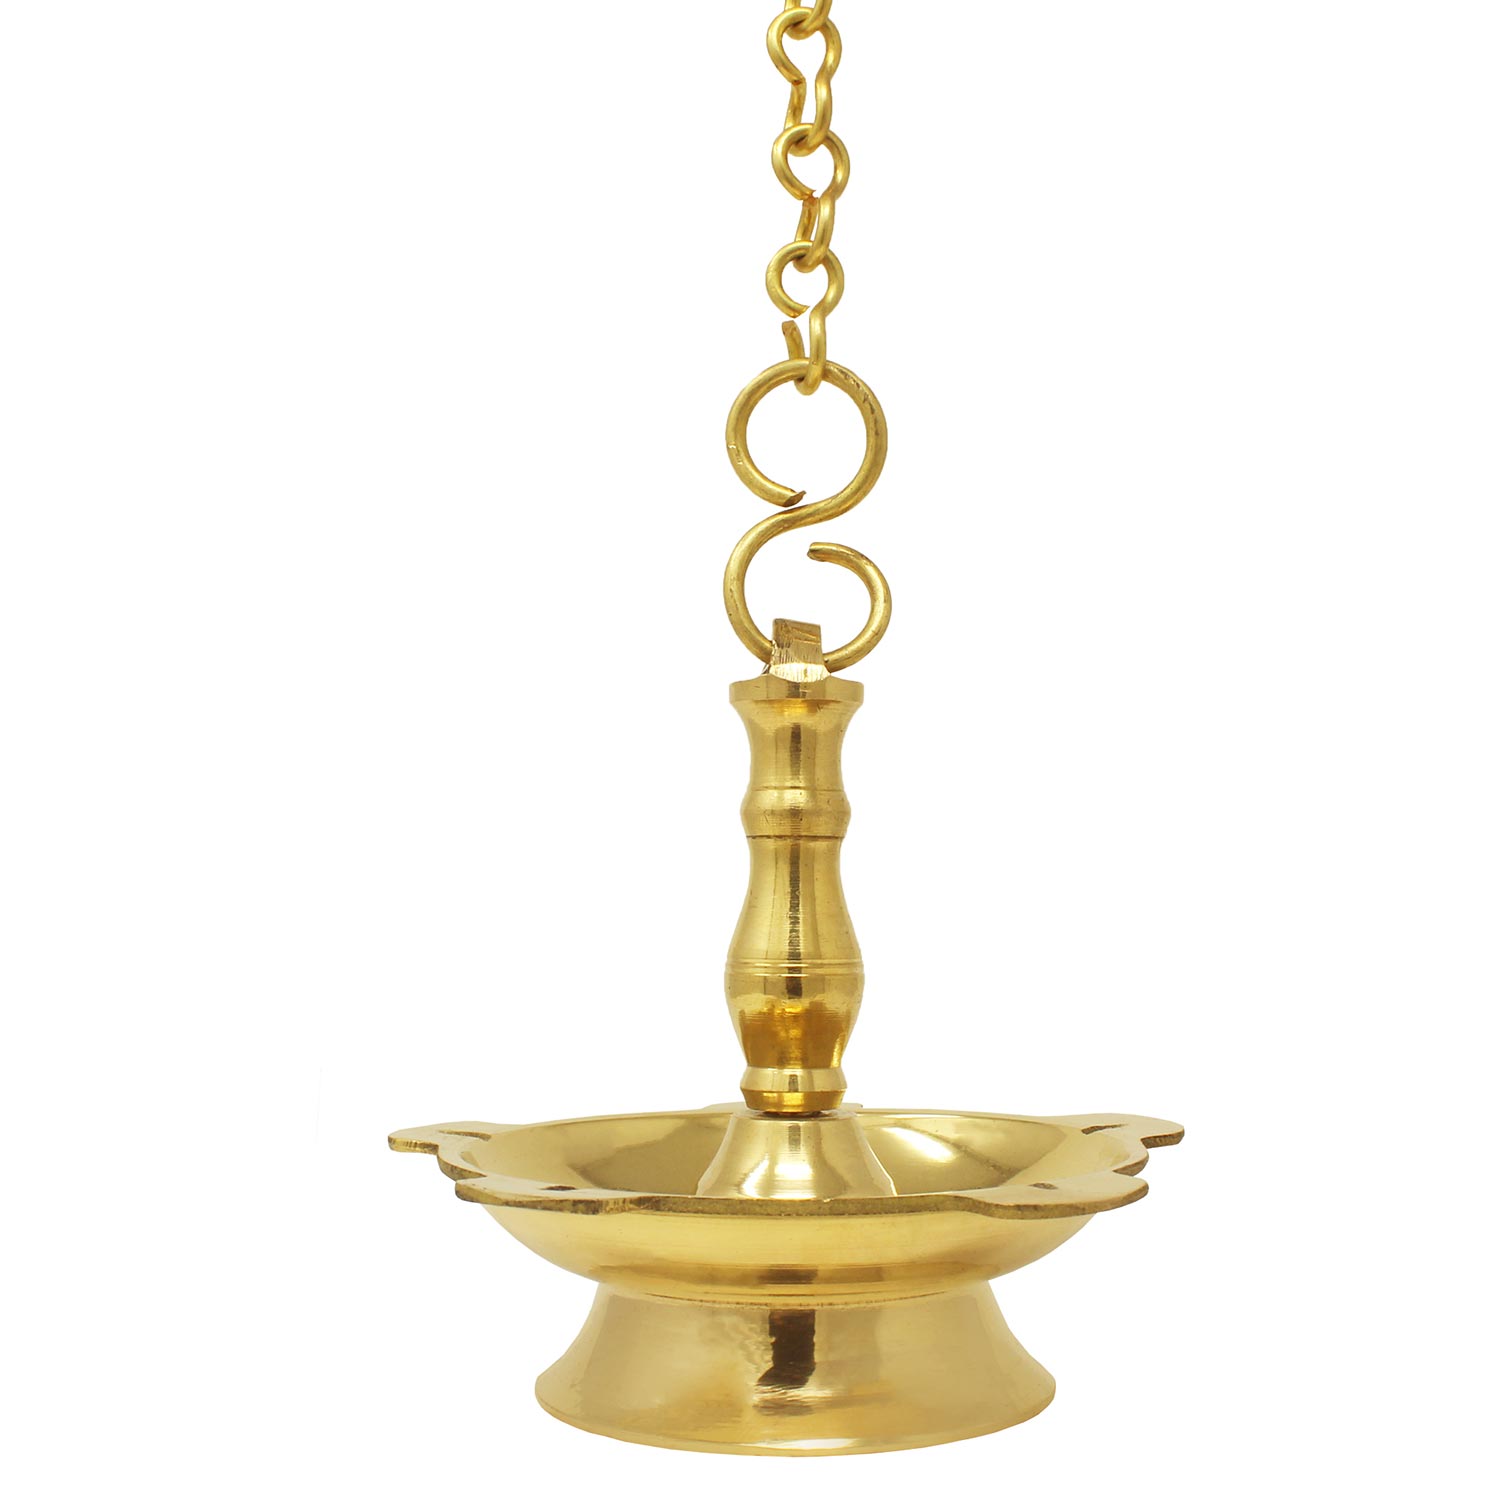 Hanging Oil lamp with 5 wicks